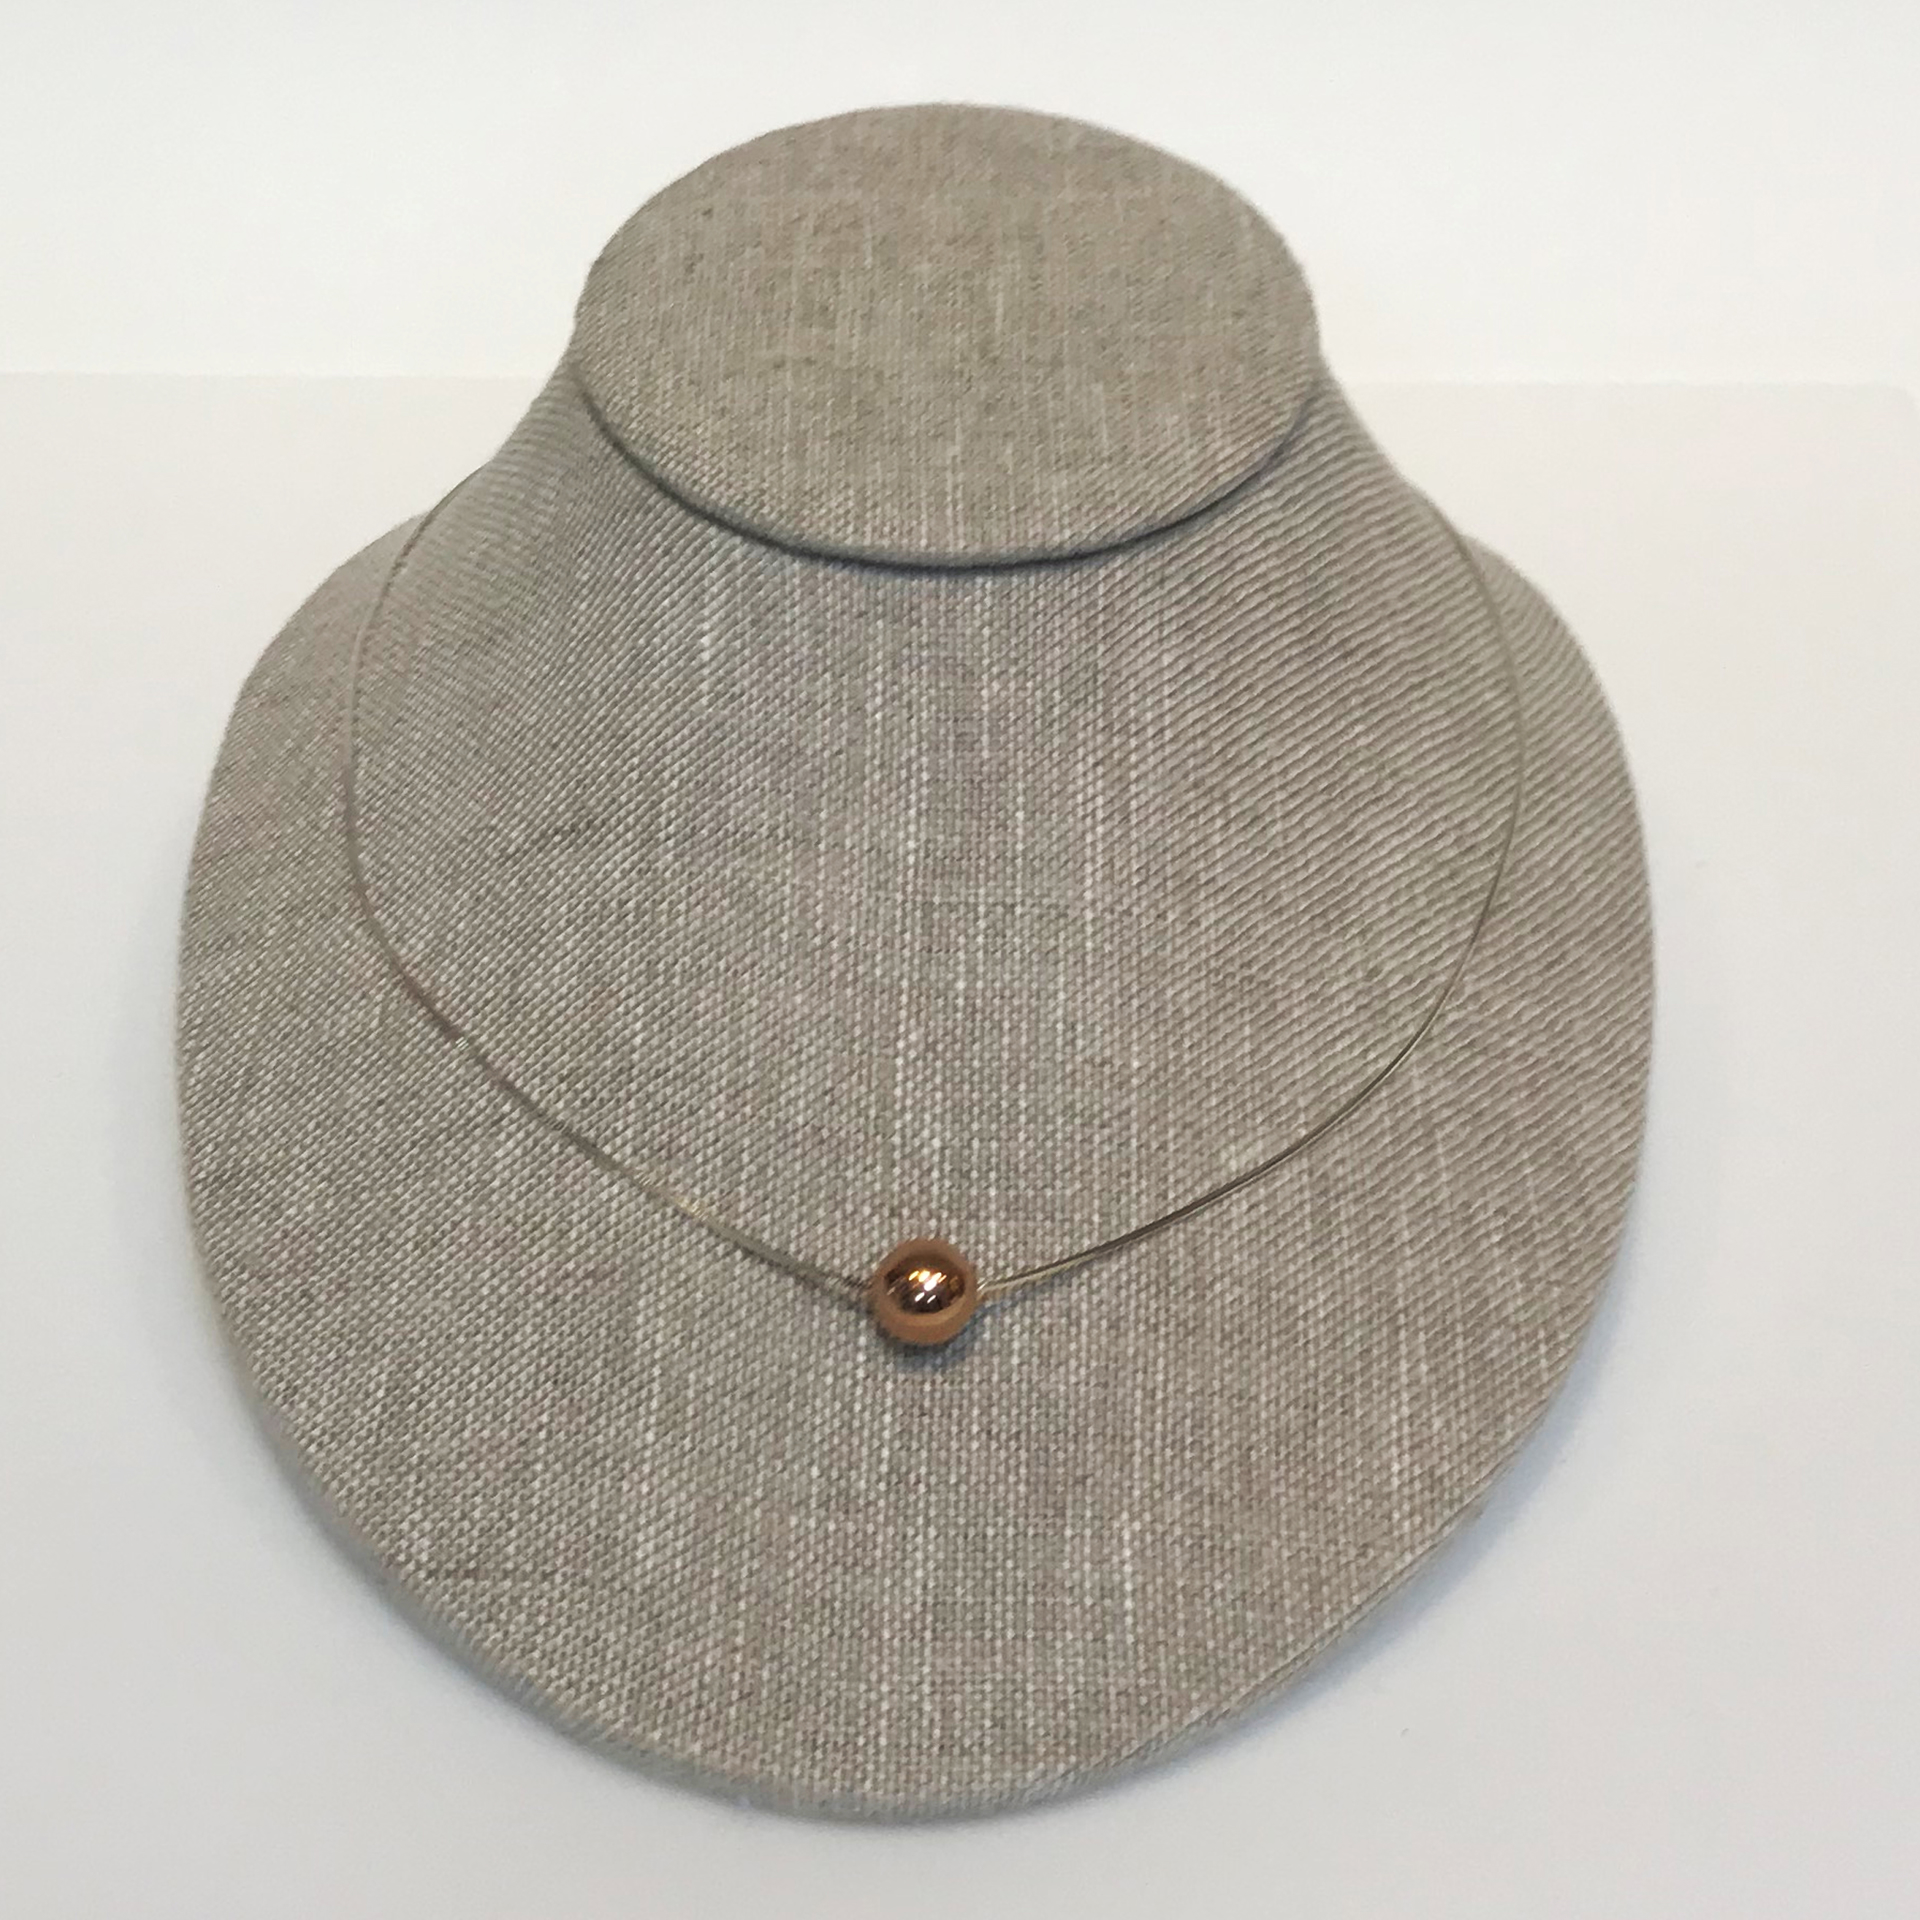 18" Eunity Necklace with Copper Bead by Suzanne Woodworth